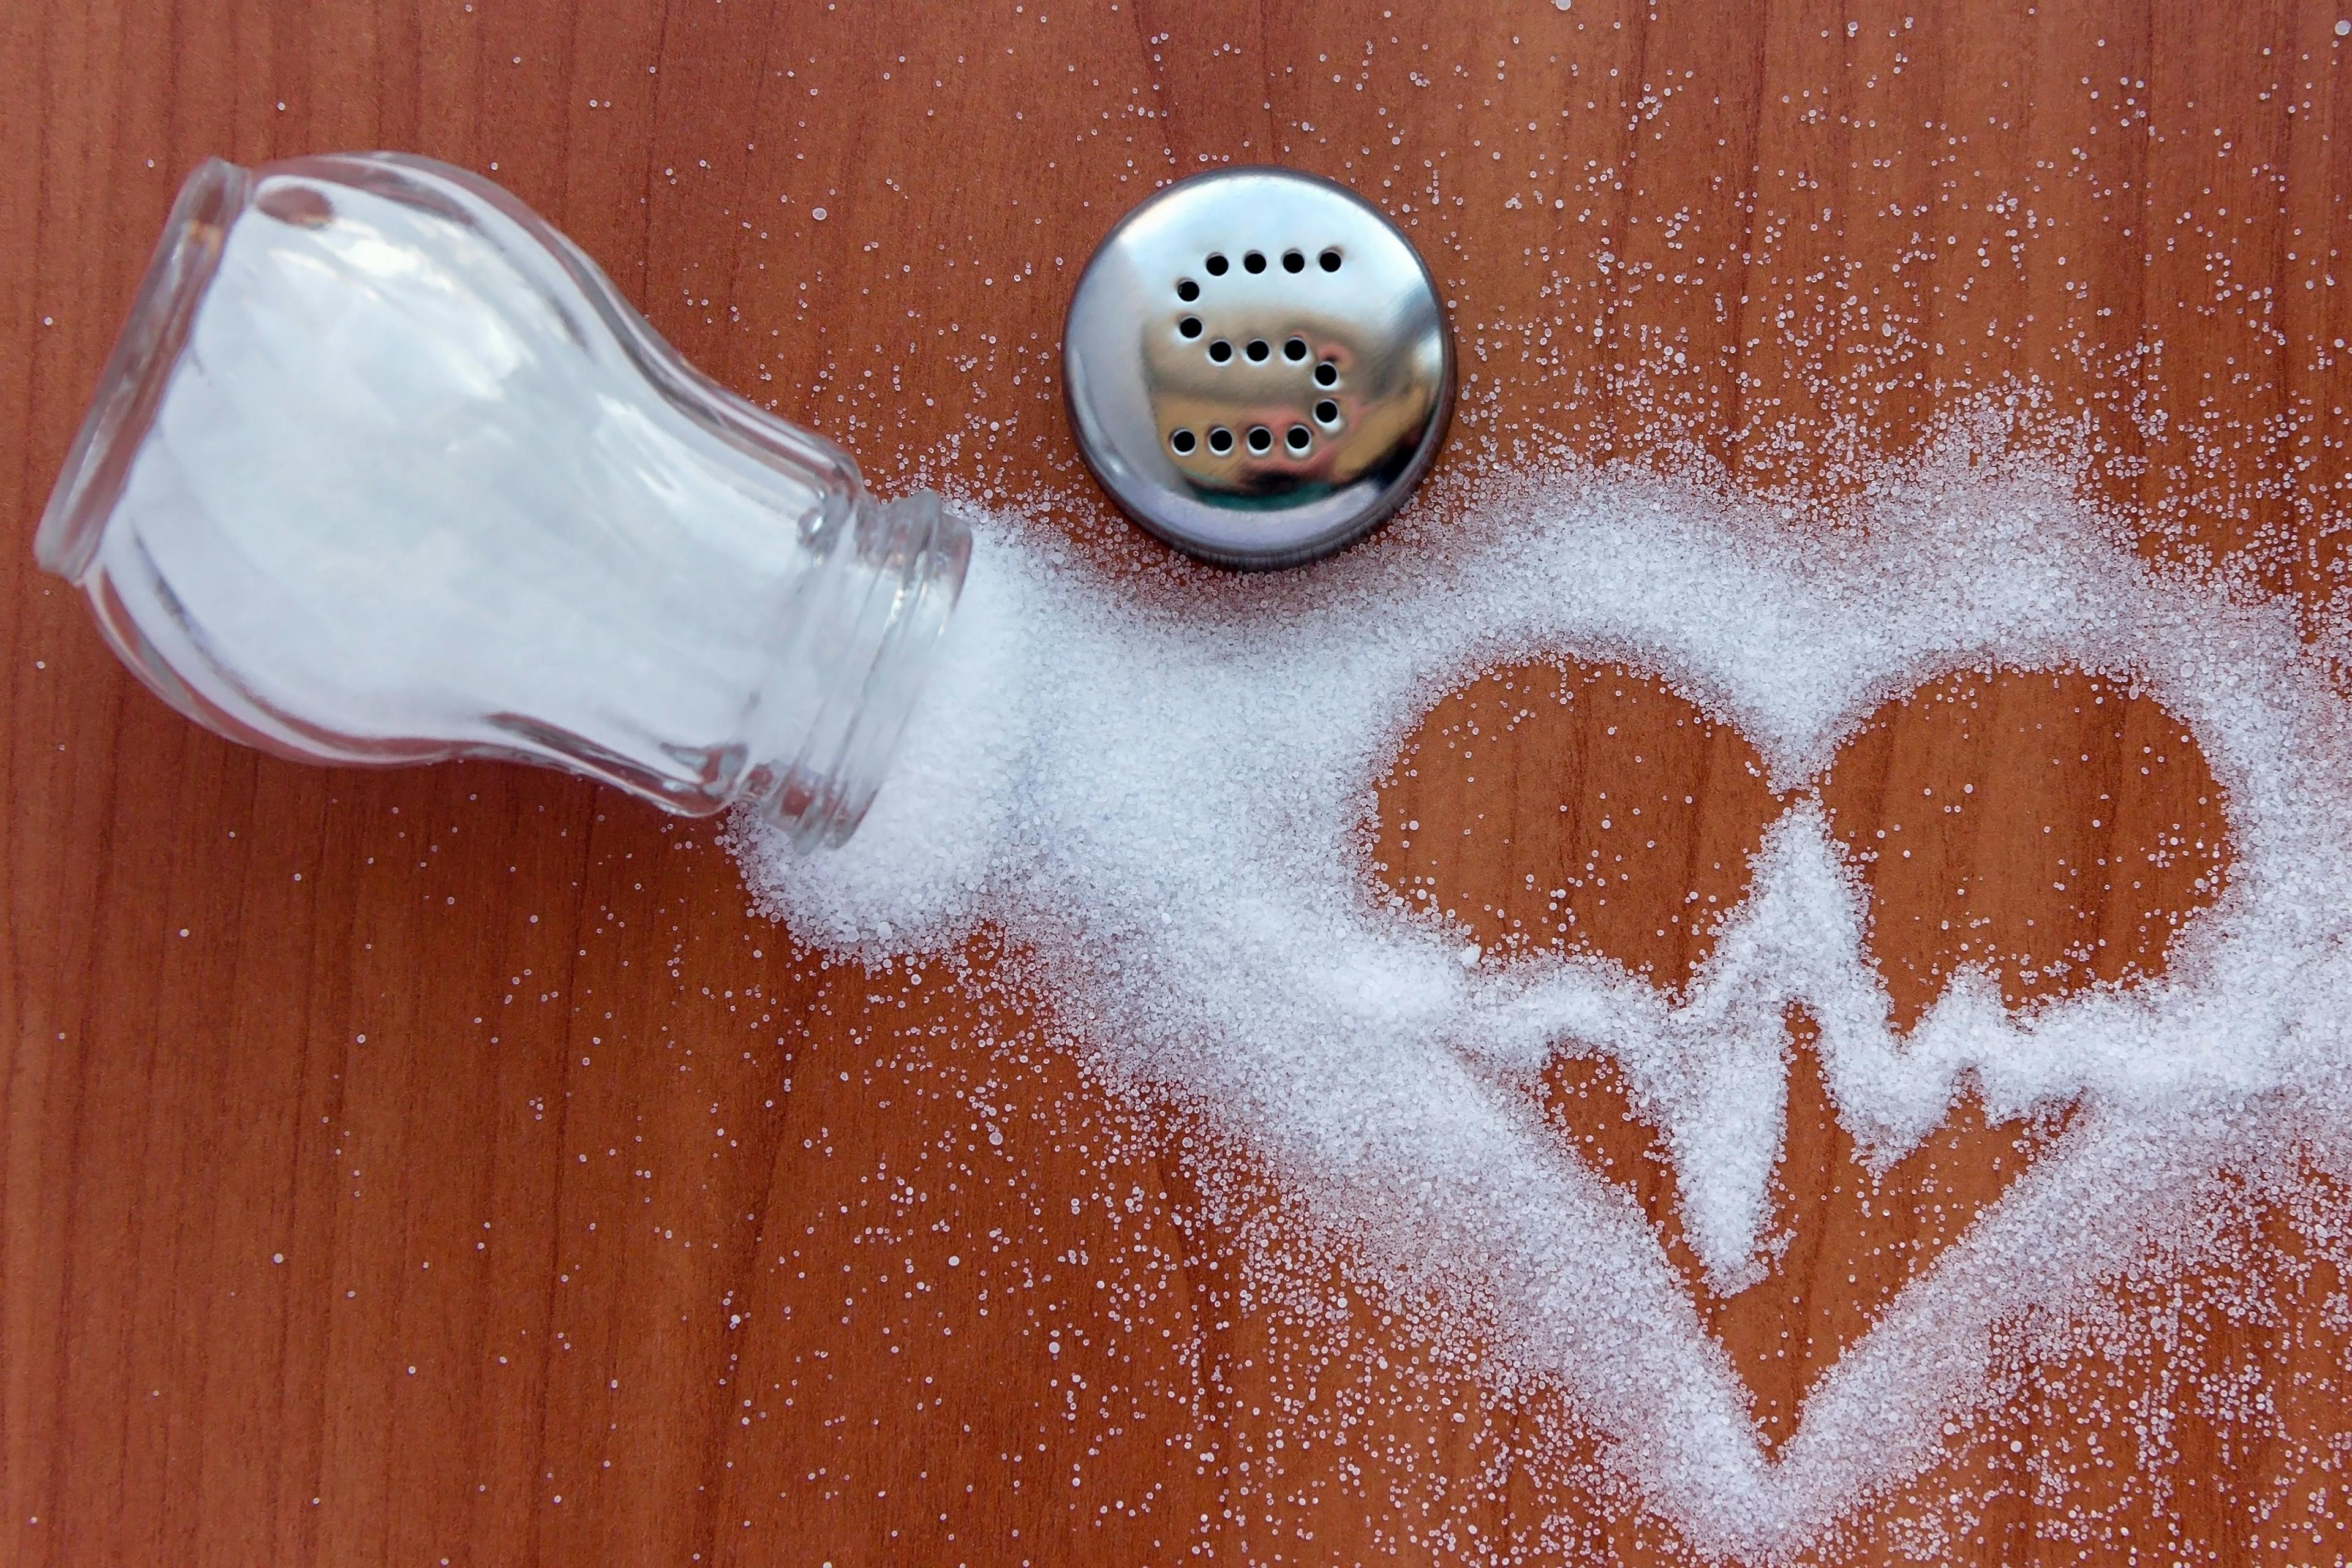 Replacing Salt With Substitute May Lower Hypertension Risk in Older Adults